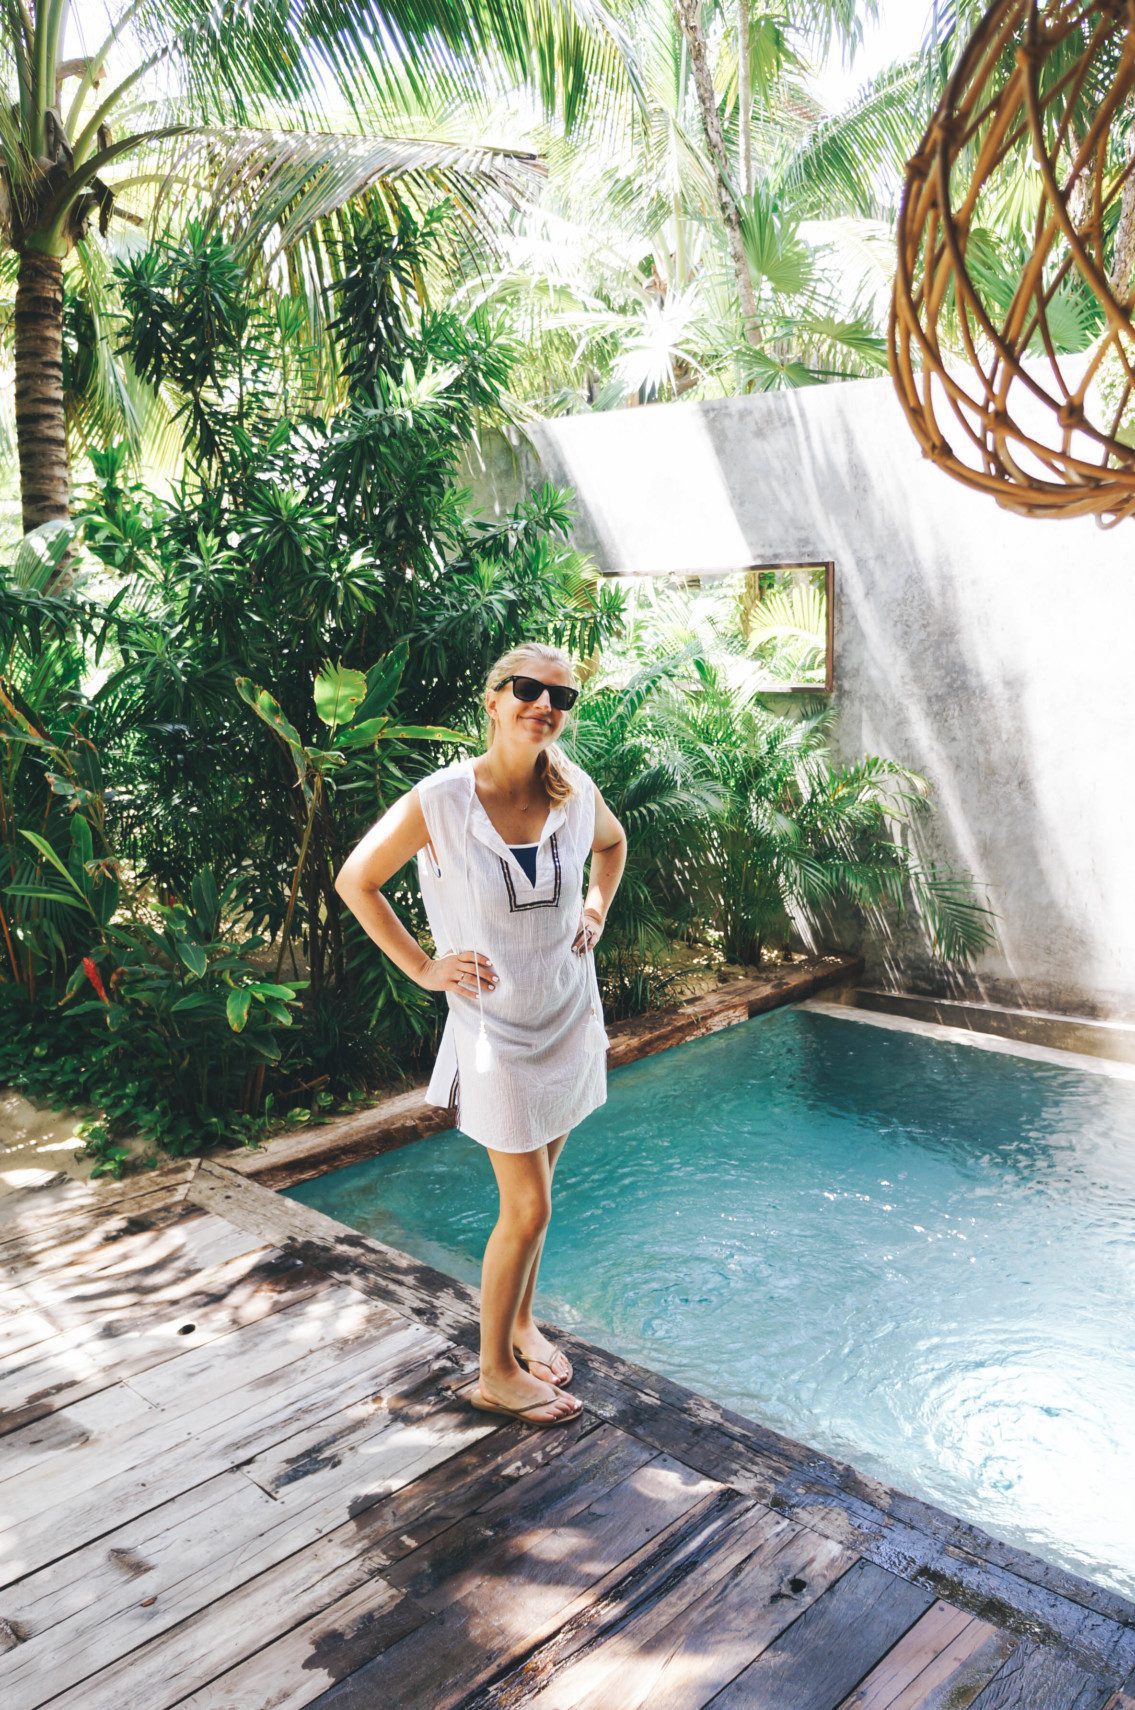 Looking for the best hotel in Tulum? Look no further than Be Tulum, a luxury boutique hotel with gorgeous interiors and private plunge pools off the rooms.